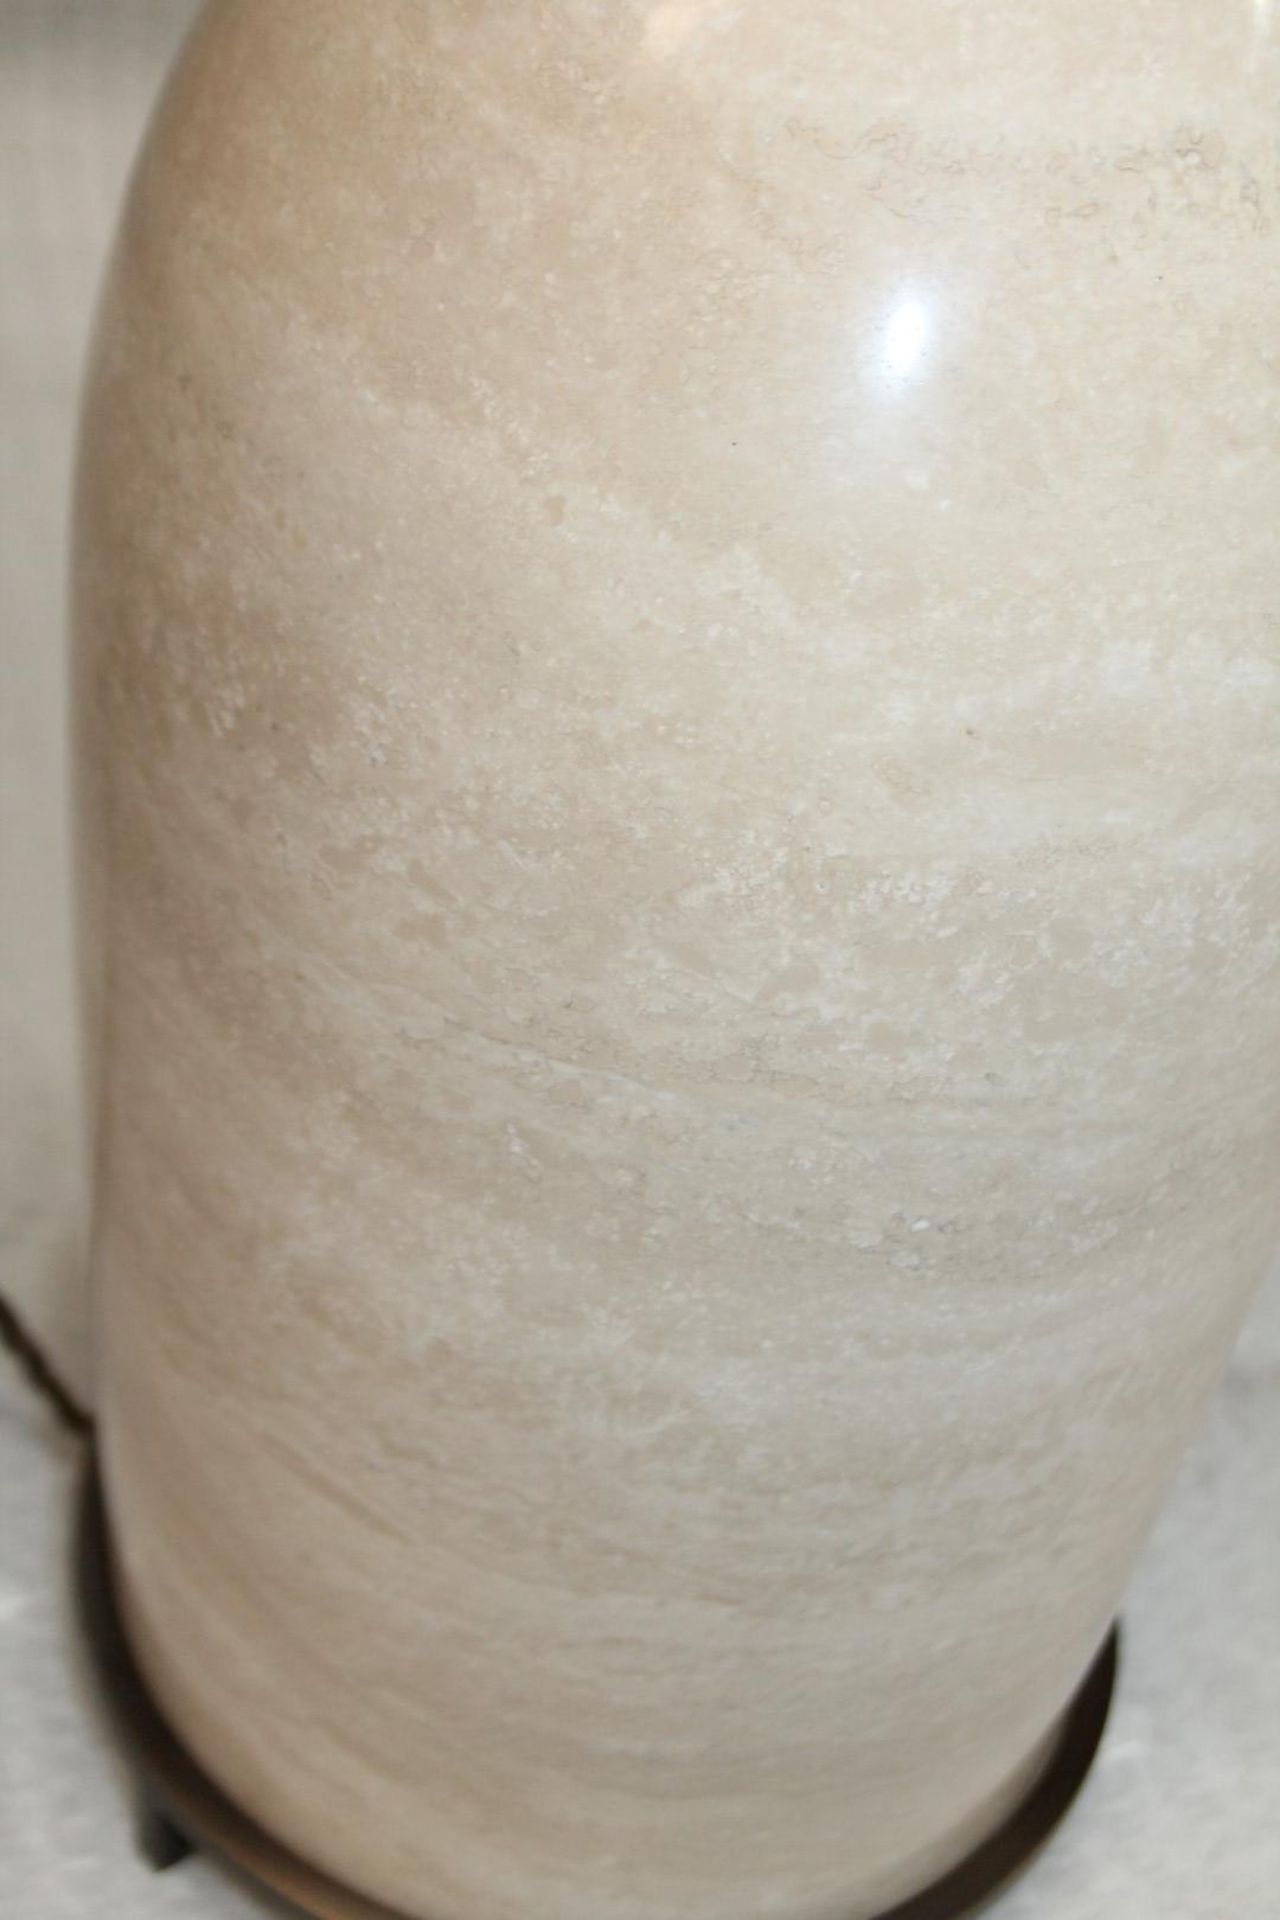 1 x AGGIOLIGHT Luxury Marble Table Lamp - Recently Removed From A World-renowned London Department - Image 3 of 6